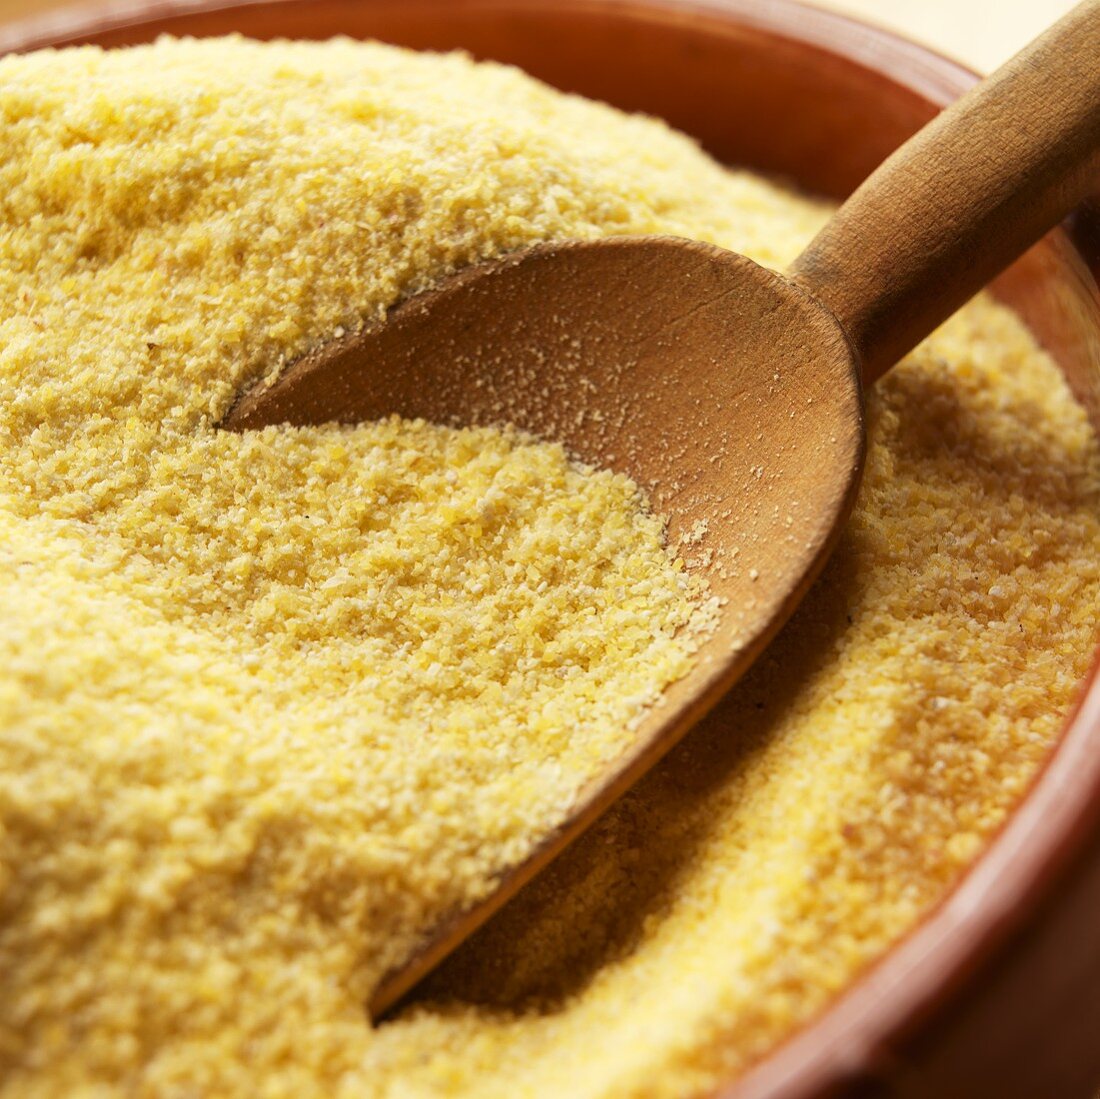 Bowl of Cornmeal with Wooden Scoop